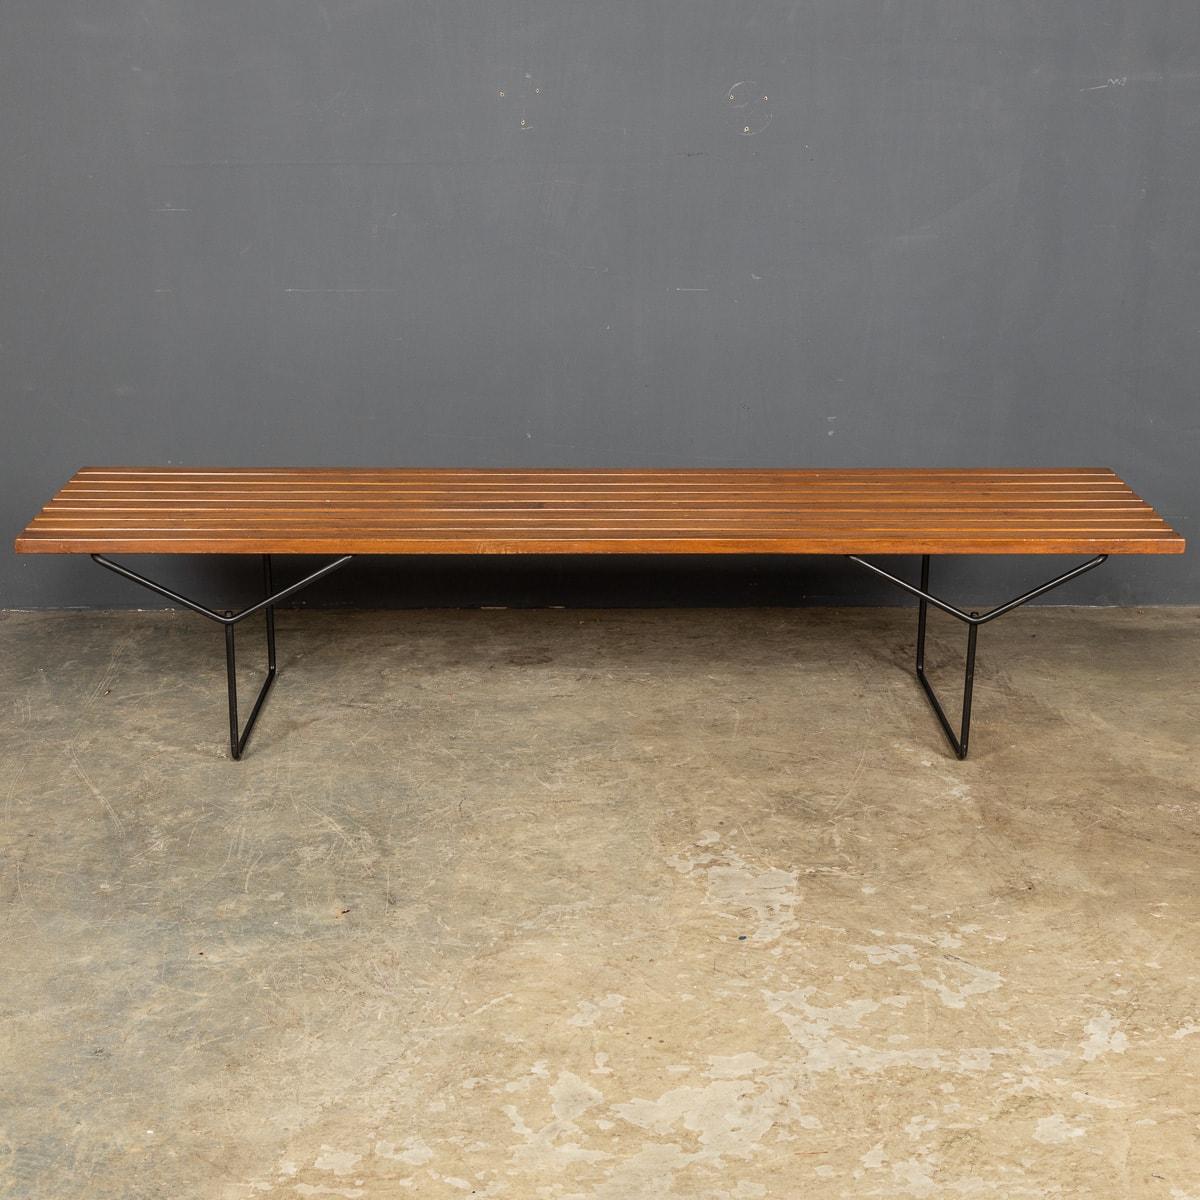 Mid 20th Century Teak slatted bench on a strong thin metal frame, a sleek Scandinavian design.

CONDITION
In Good Condition - wear and tear consistent with age.

SIZE
Width: 182cm
Depth: 47cm
Height: 39cm